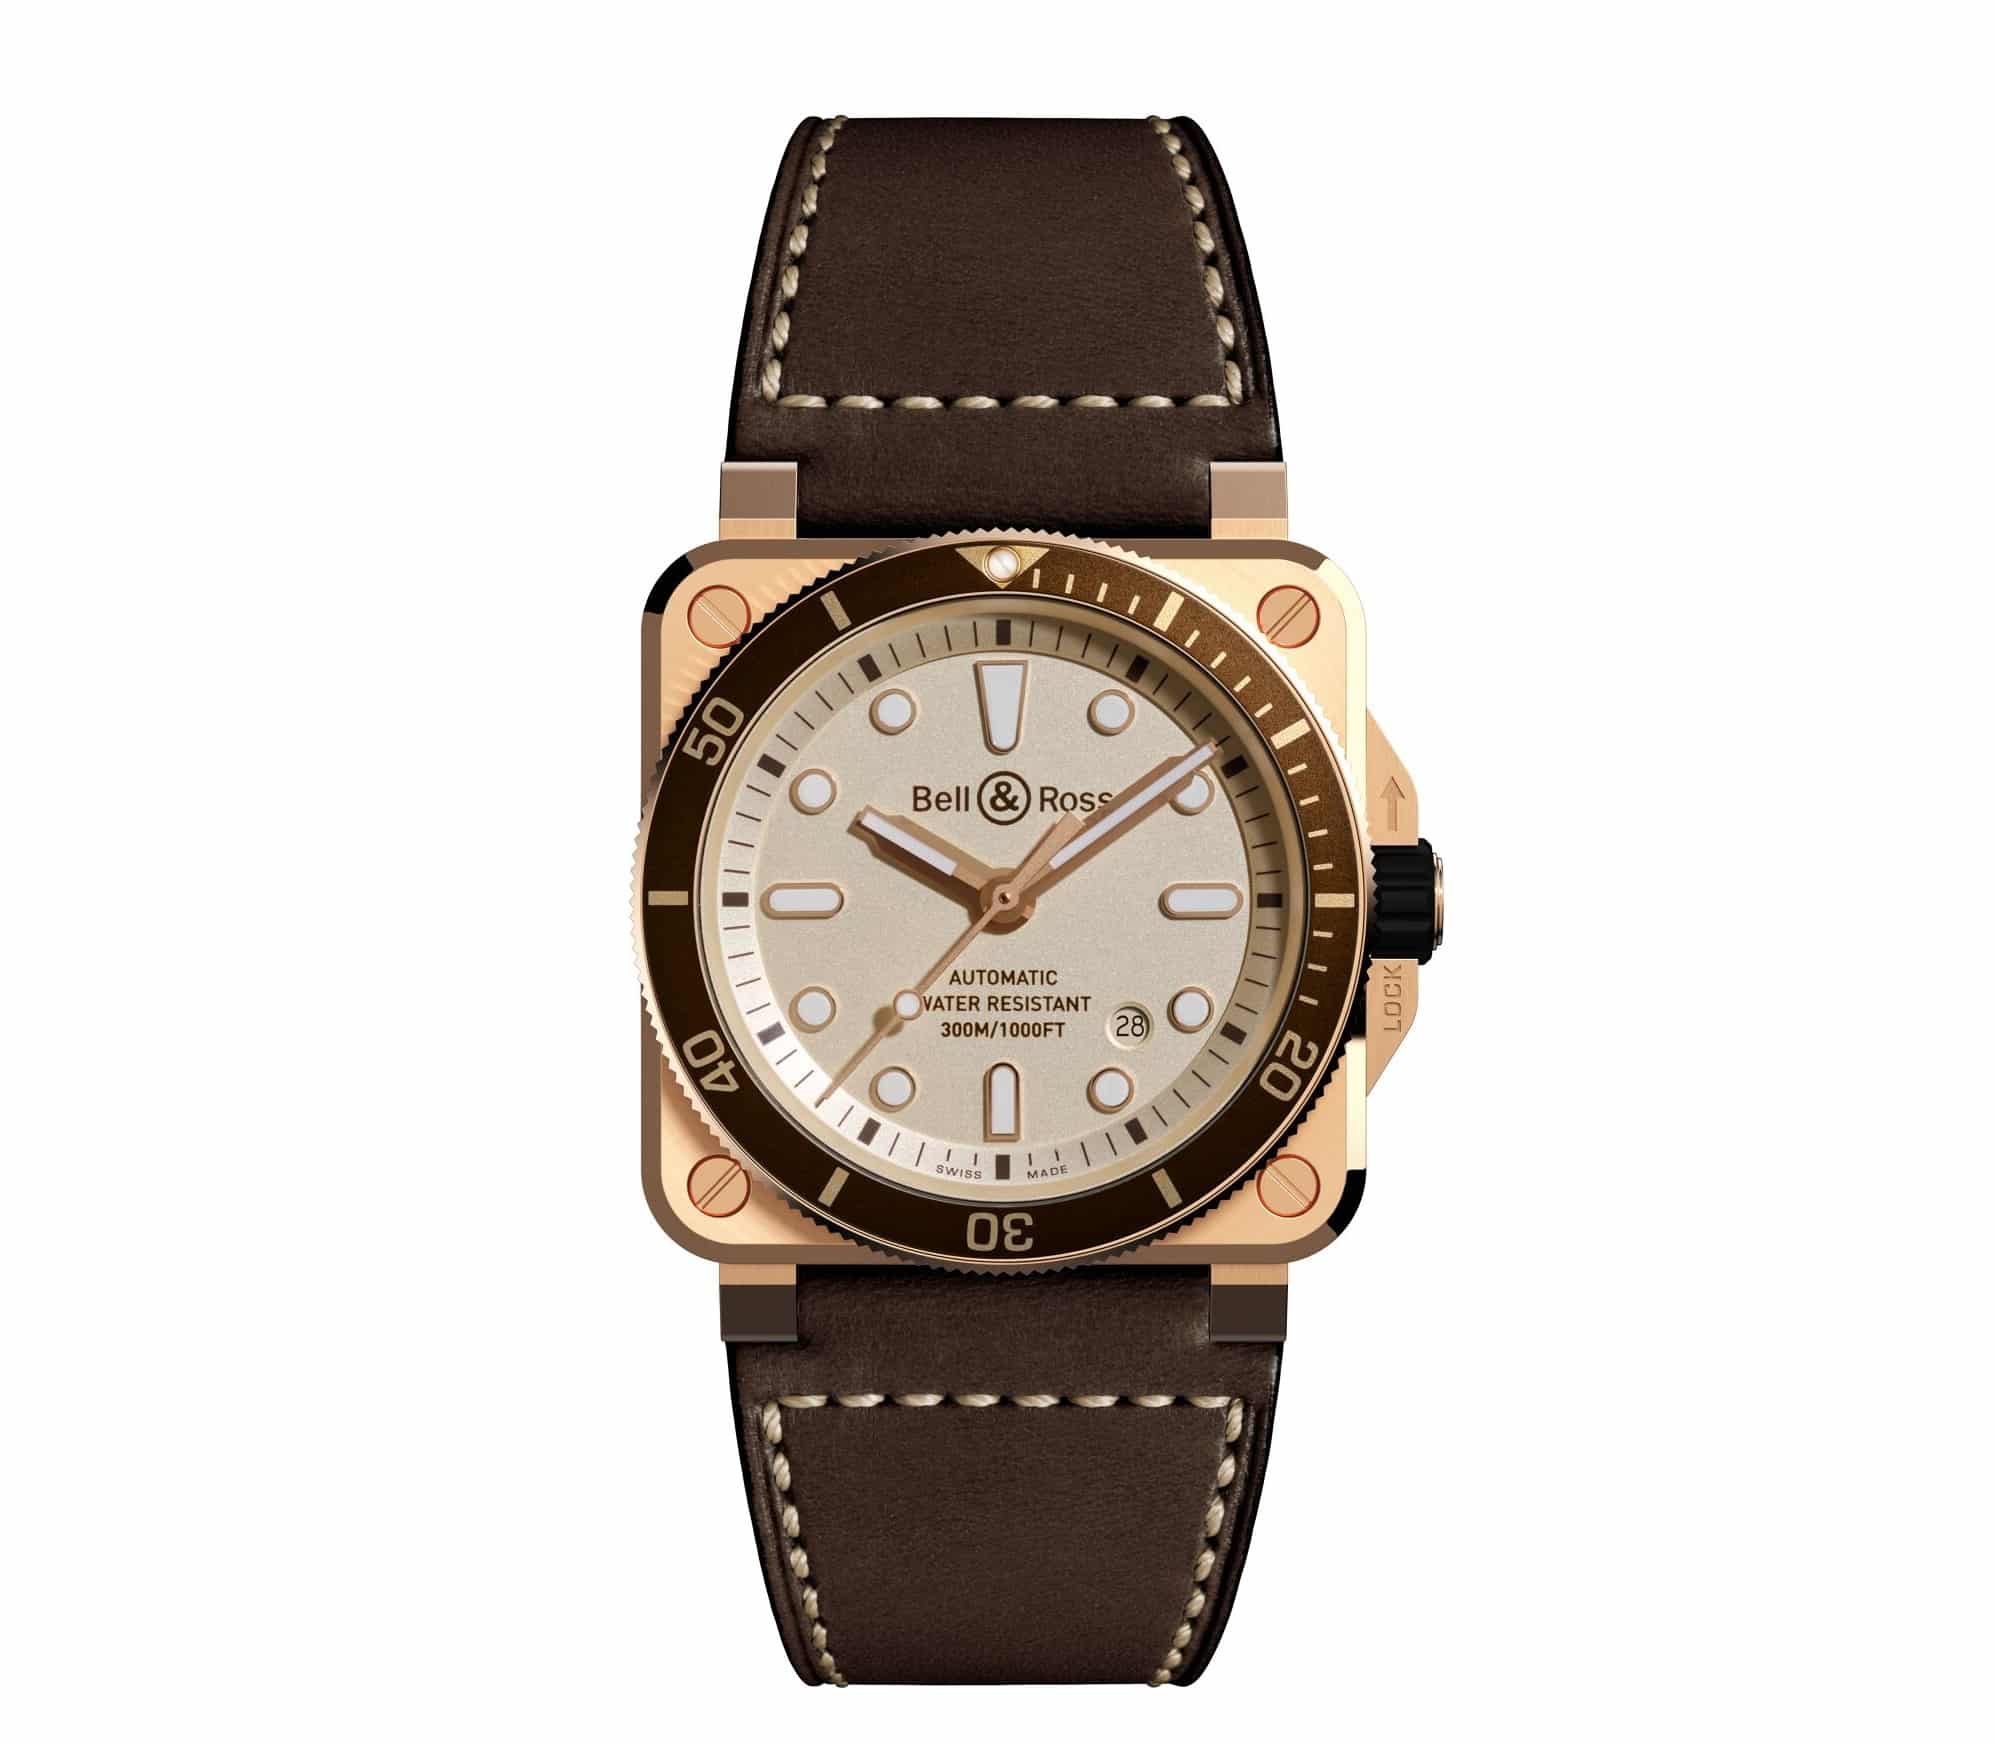 Watches & Wonders 2023 - Bell & Ross BR 03-92 Diver White Bronze